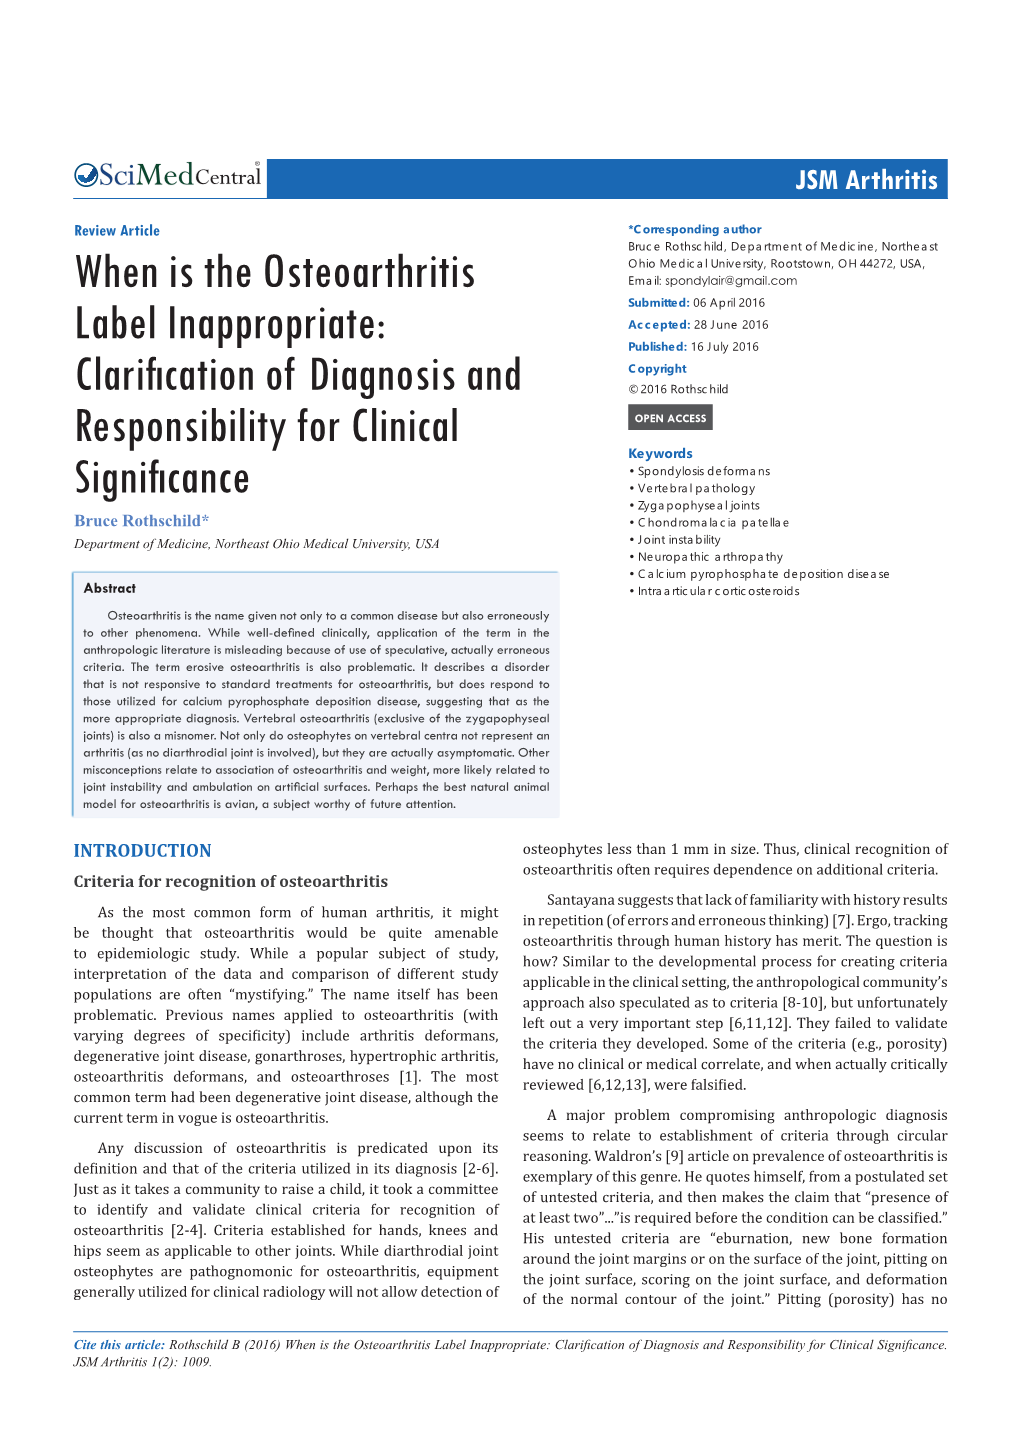 When Is the Osteoarthritis Label Inappropriate: Clarification of Diagnosis and Responsibility for Clinical Significance